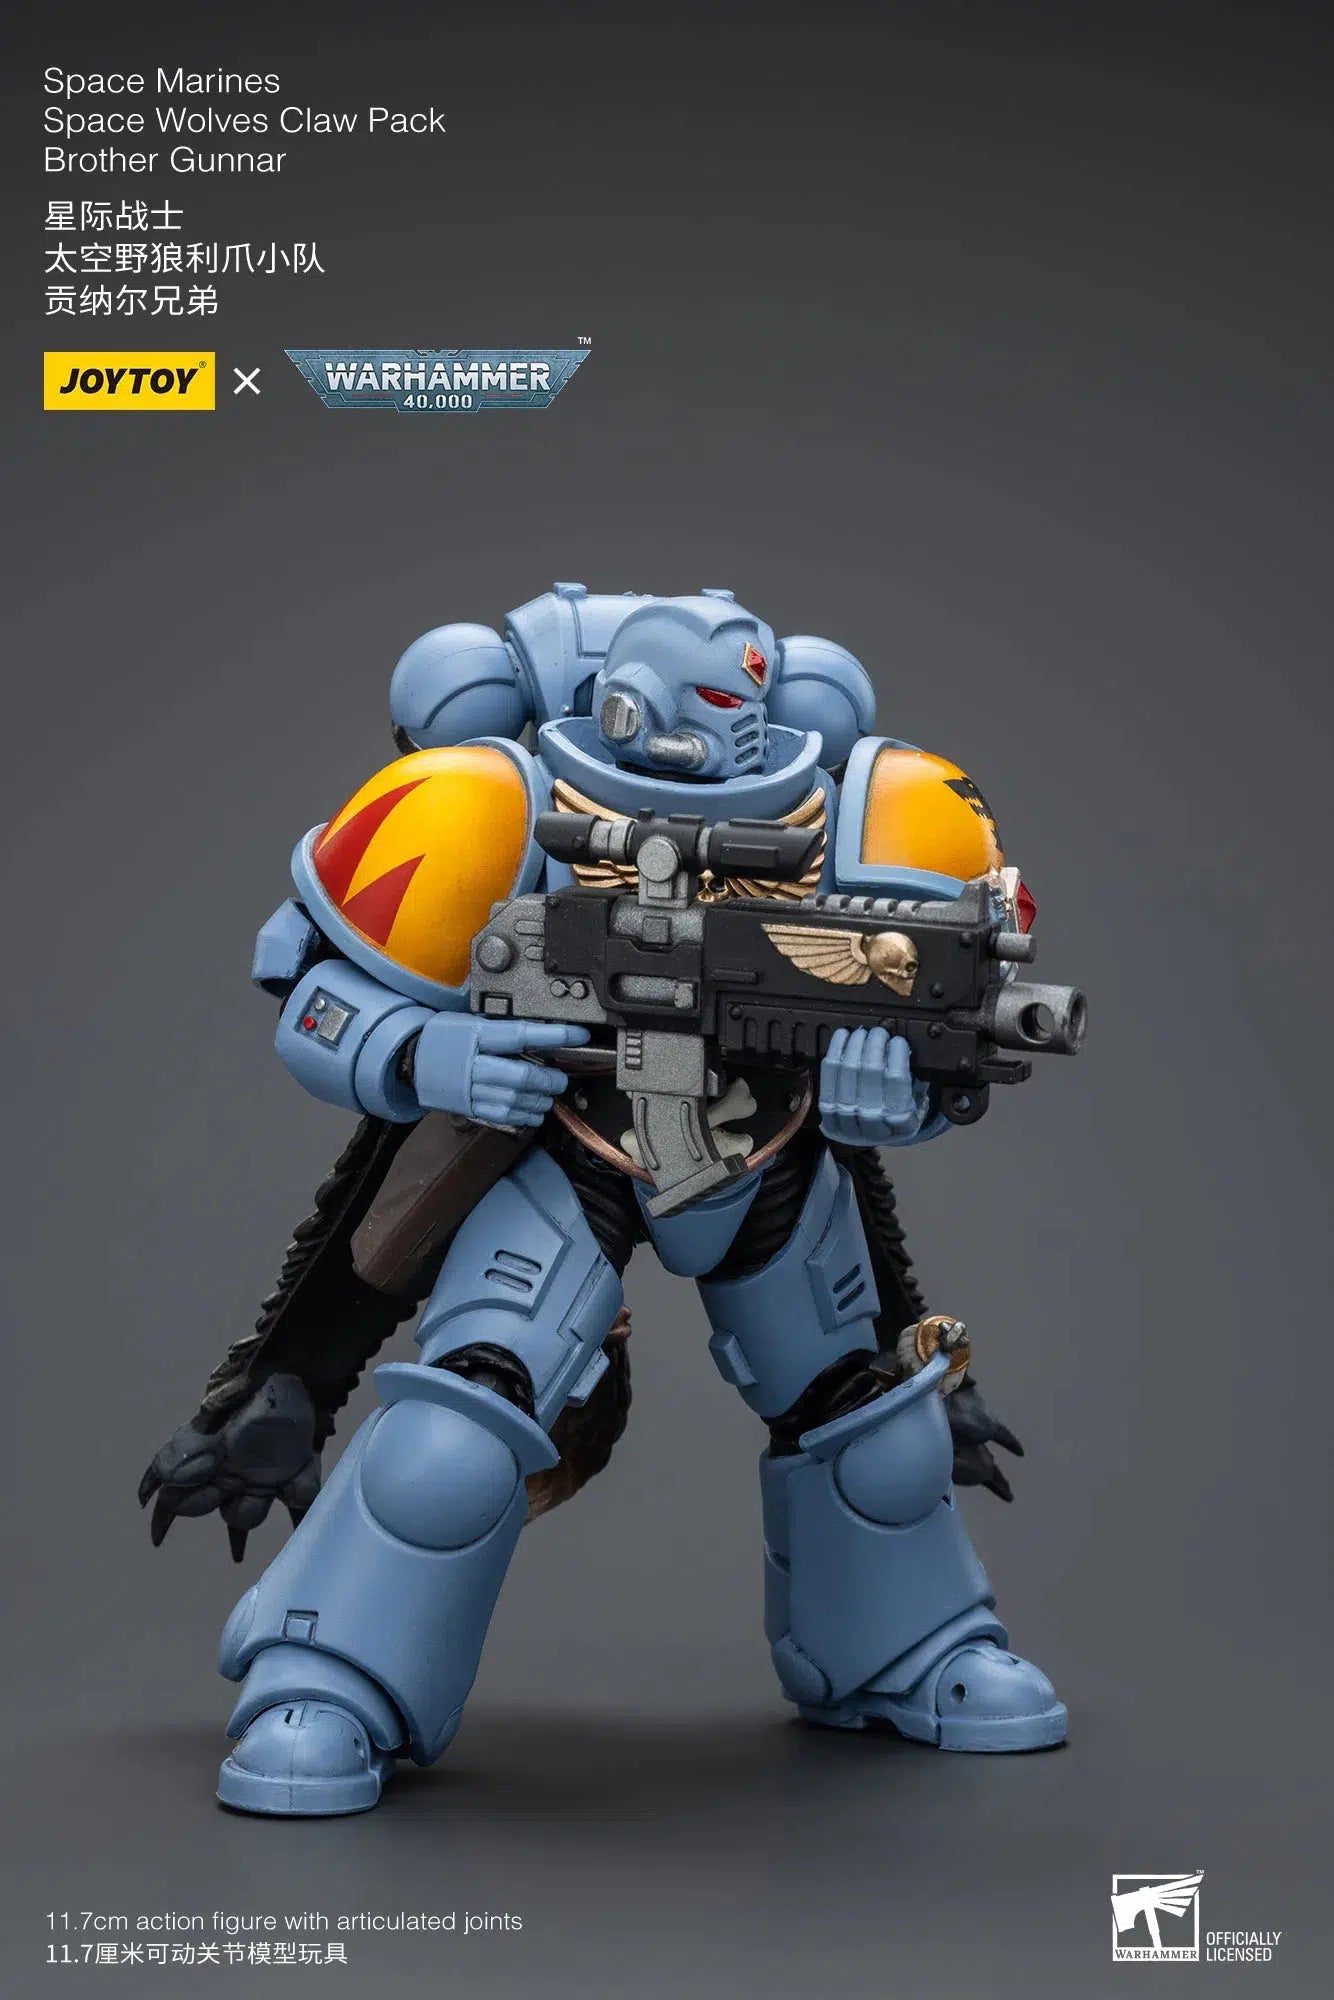 Warhammer 40K: Space Wolves: Claw Pack: Brother Gunnar: Joy Toy